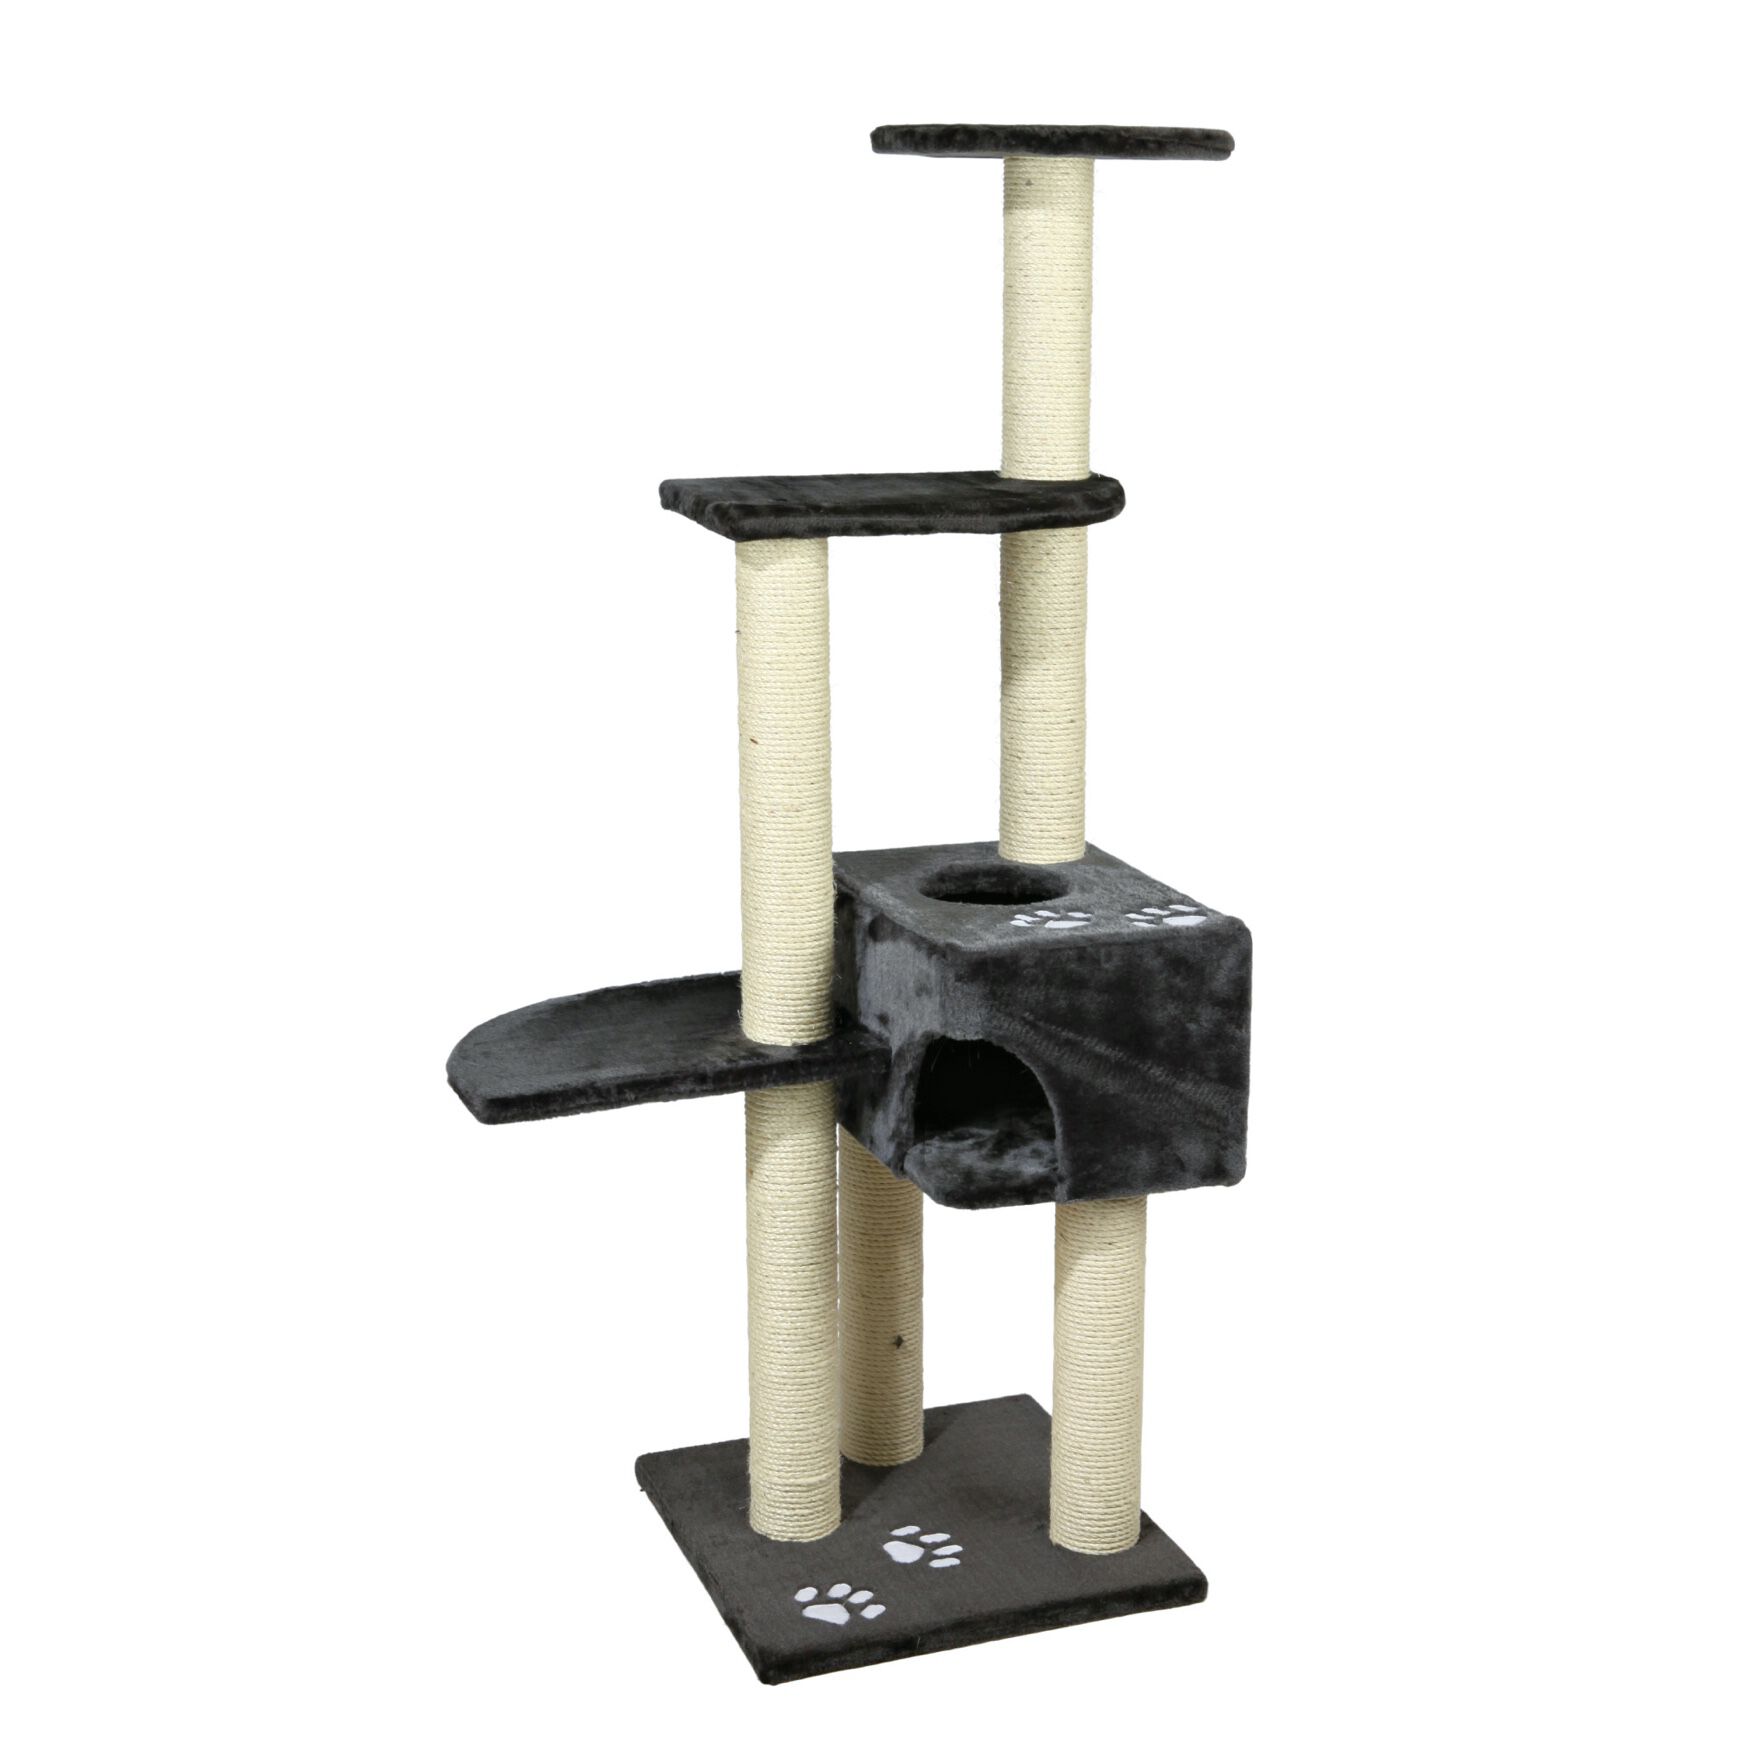 TRIXIE Pet Products Valencia Cat Tree, Beige by TRIXIE Pet Products 